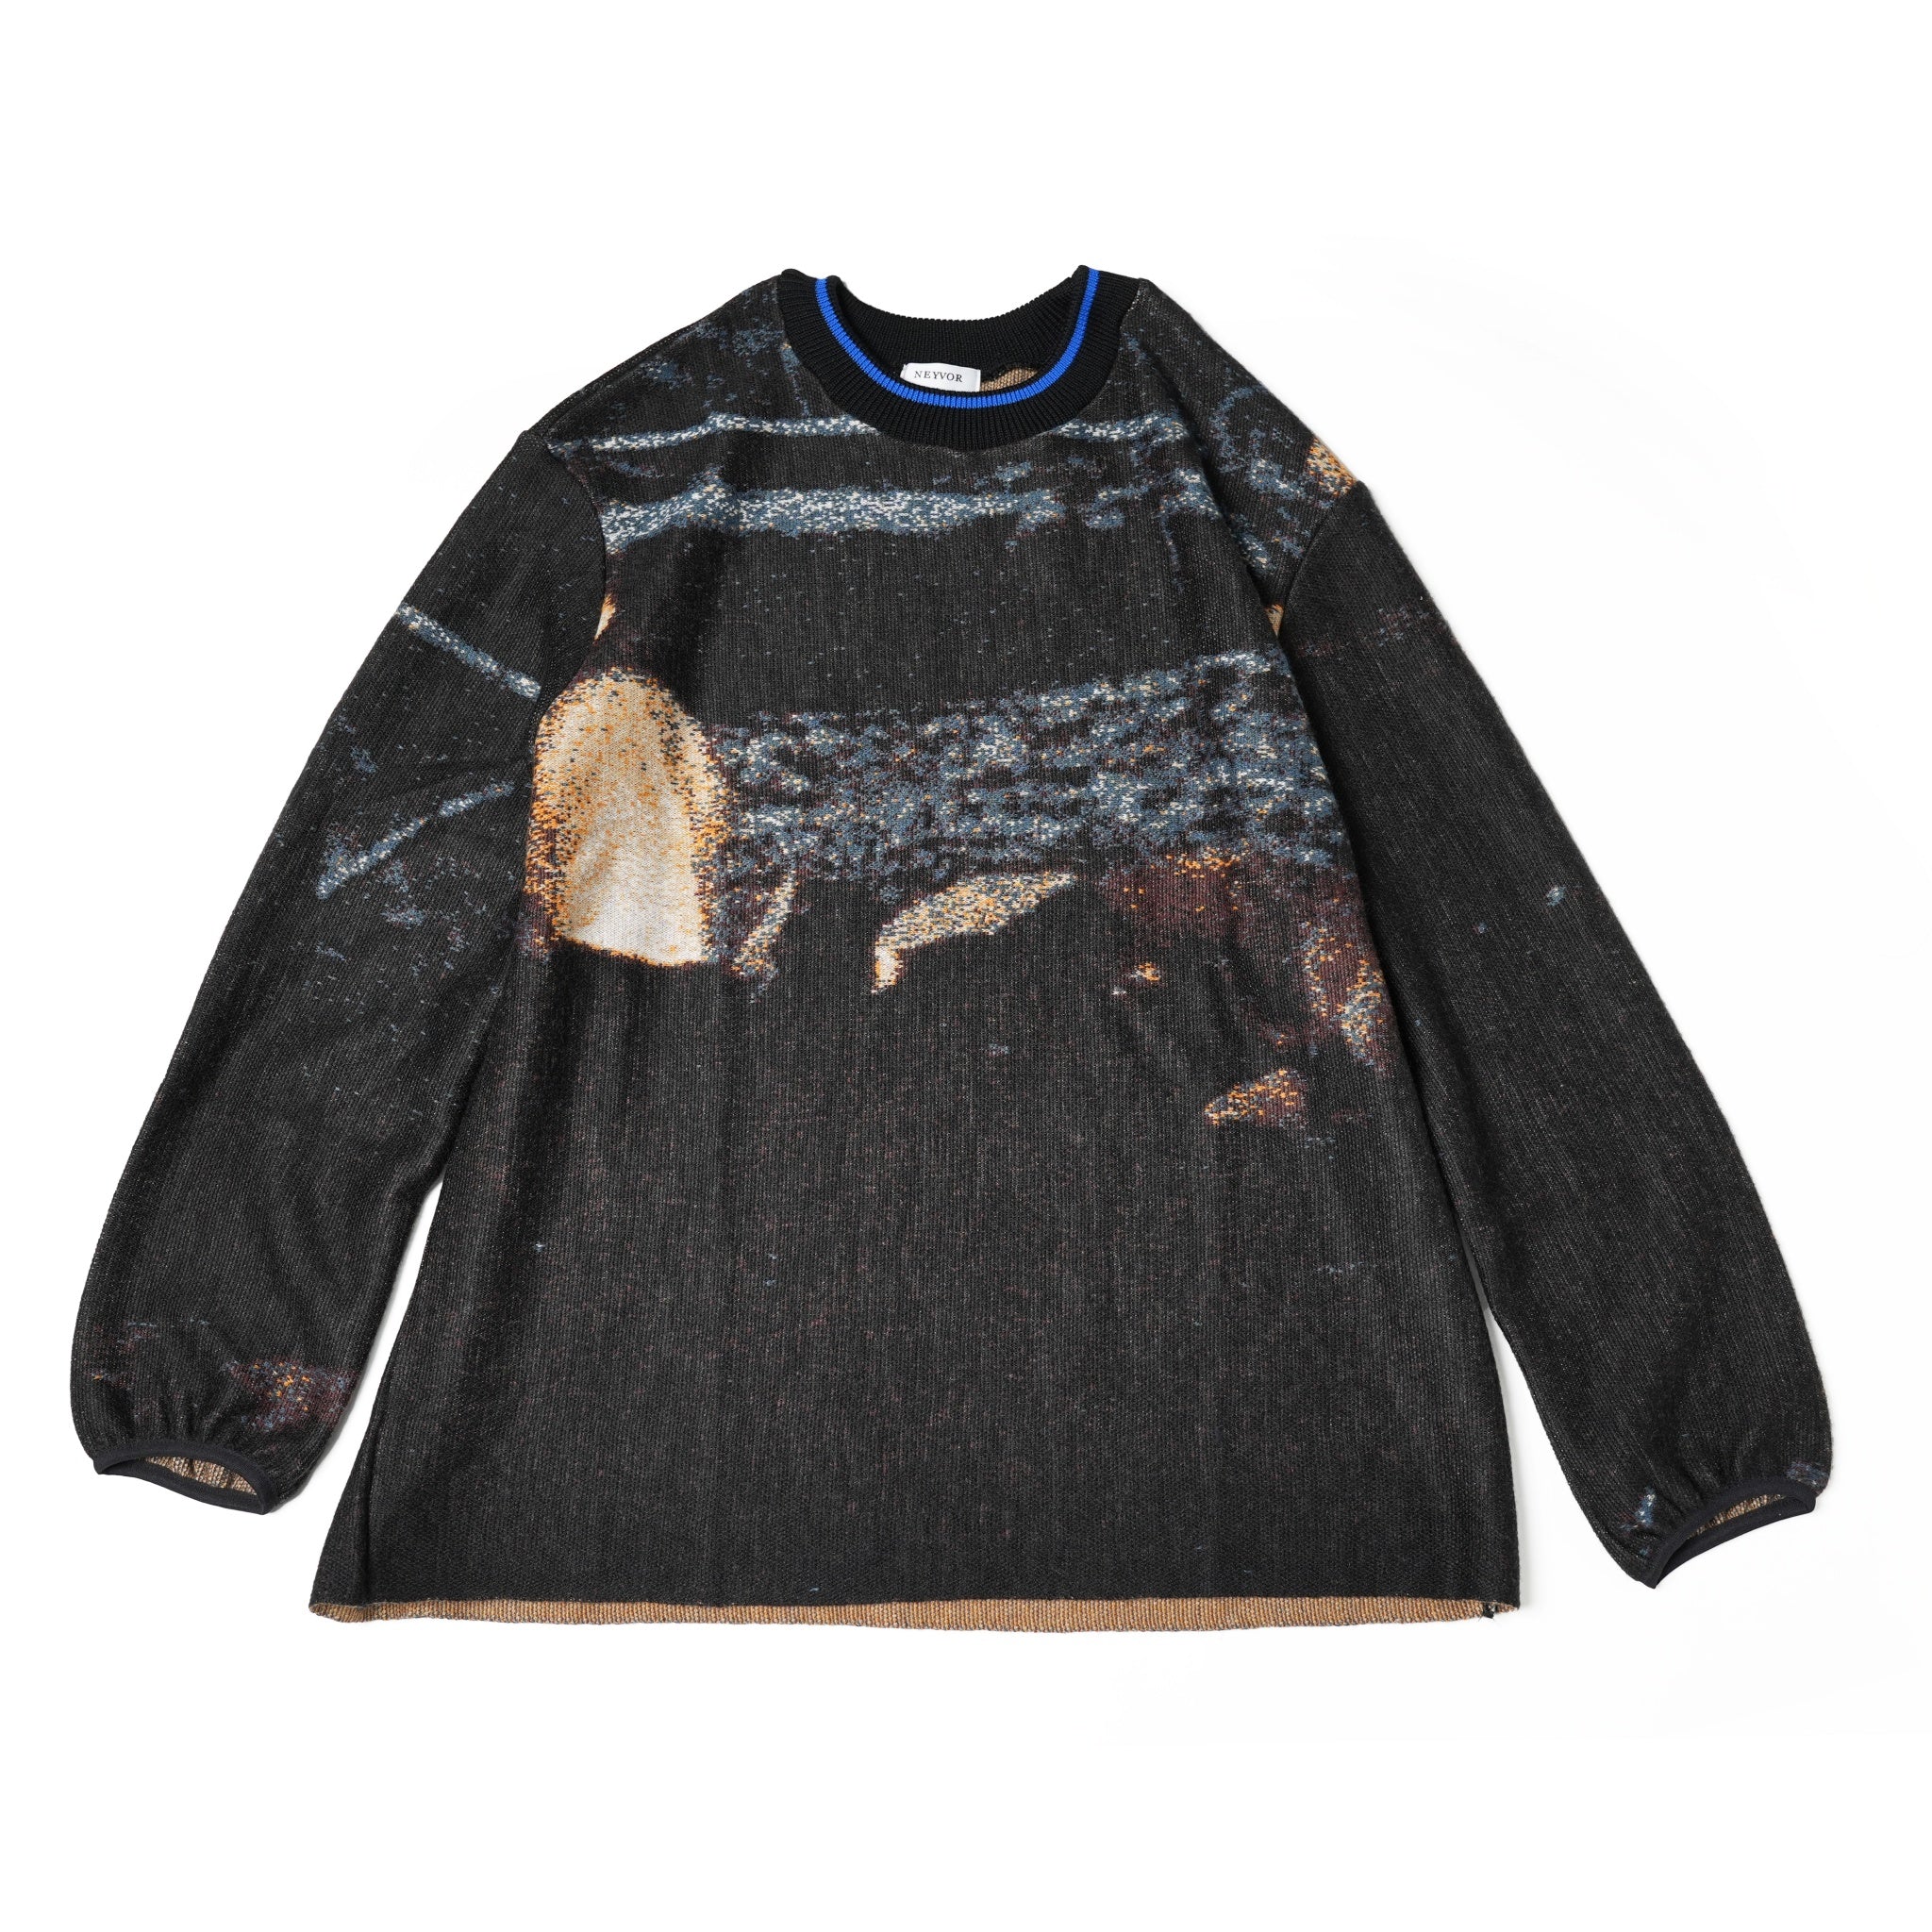 No:NV23AW-10 | Name:Road Movies Knit Sweater | Color:Black【NEYVOR